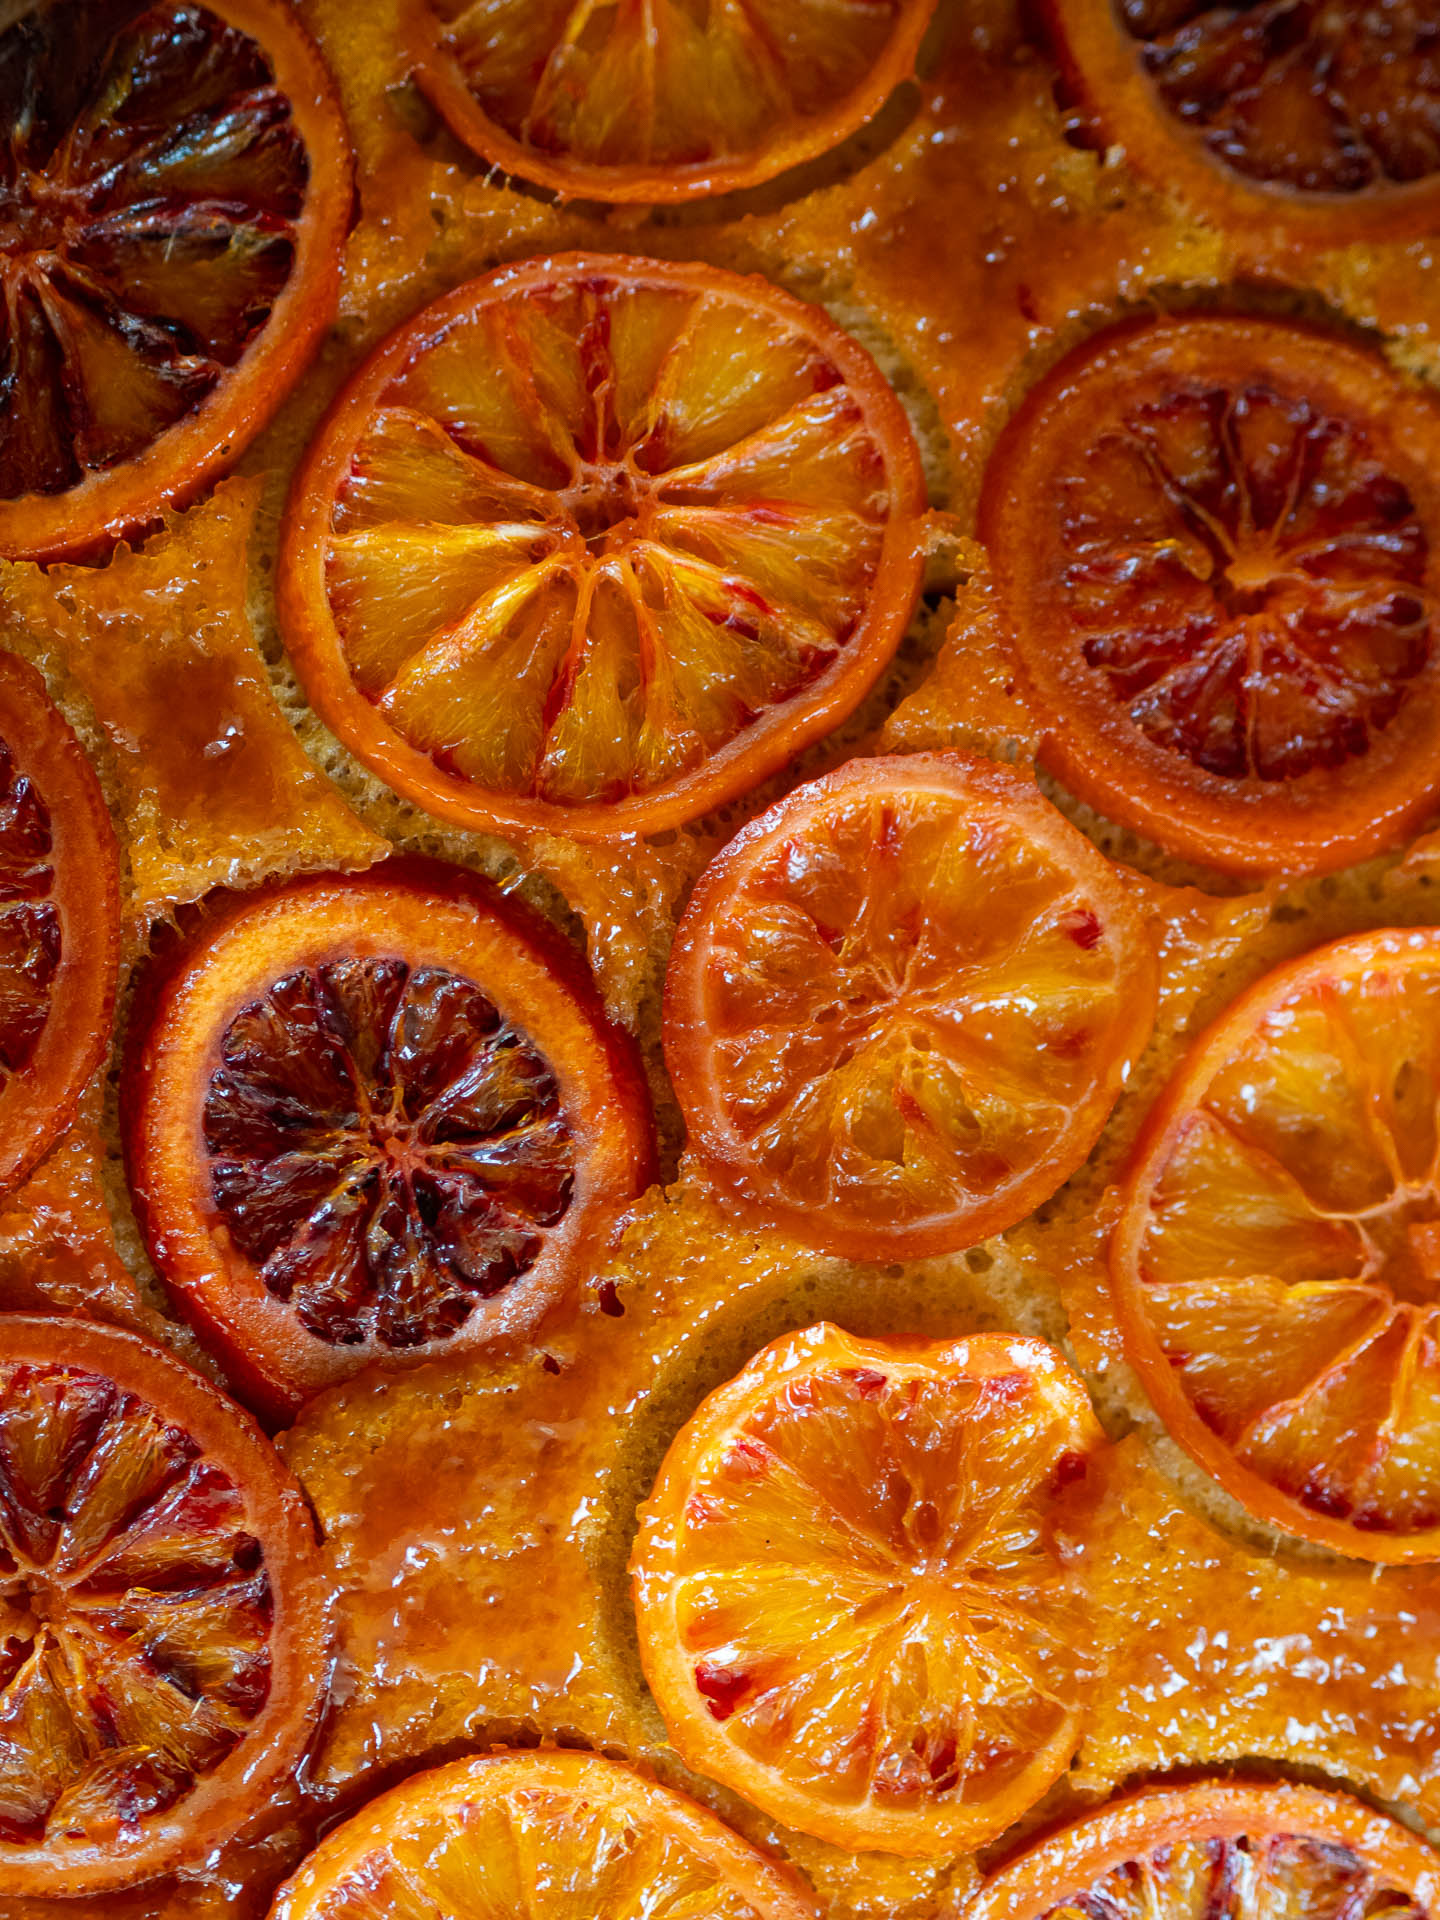 wall paper of blood oranges